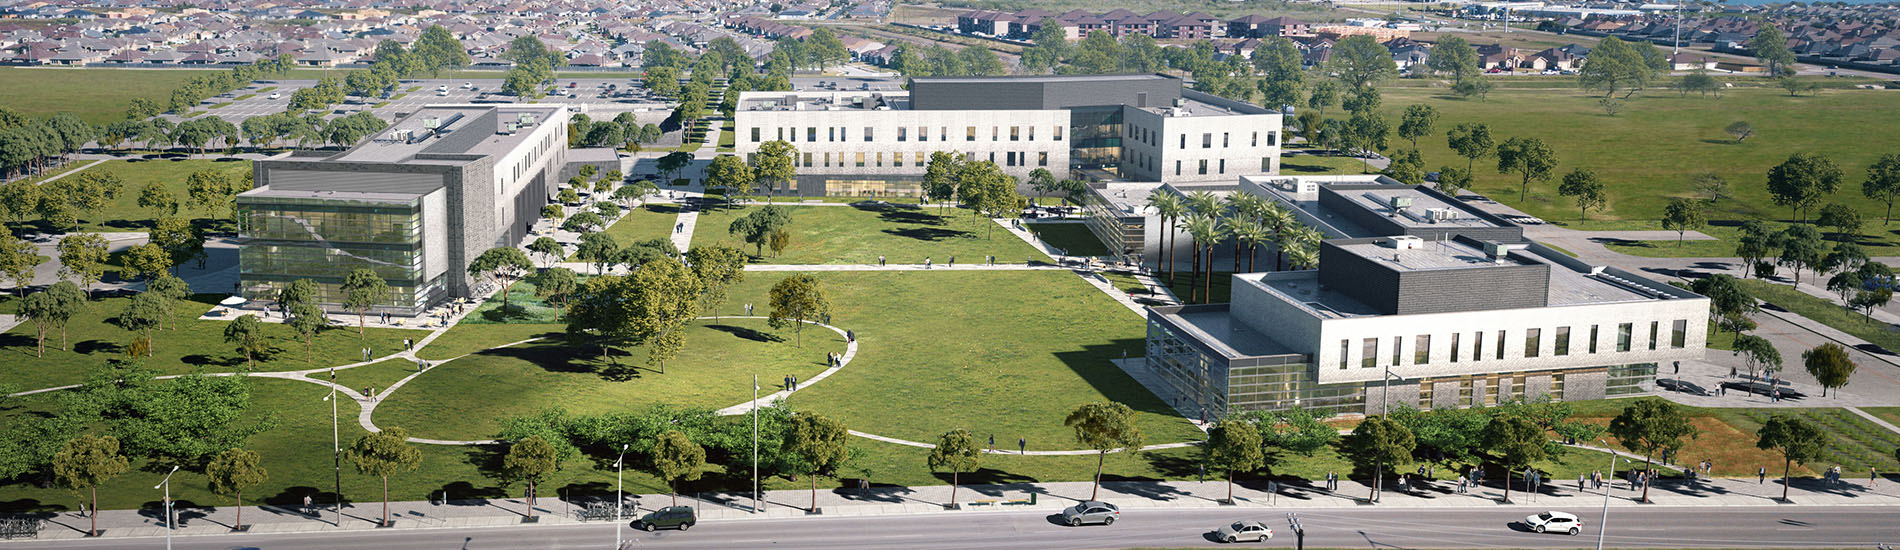 South Campus Architectural Rendering